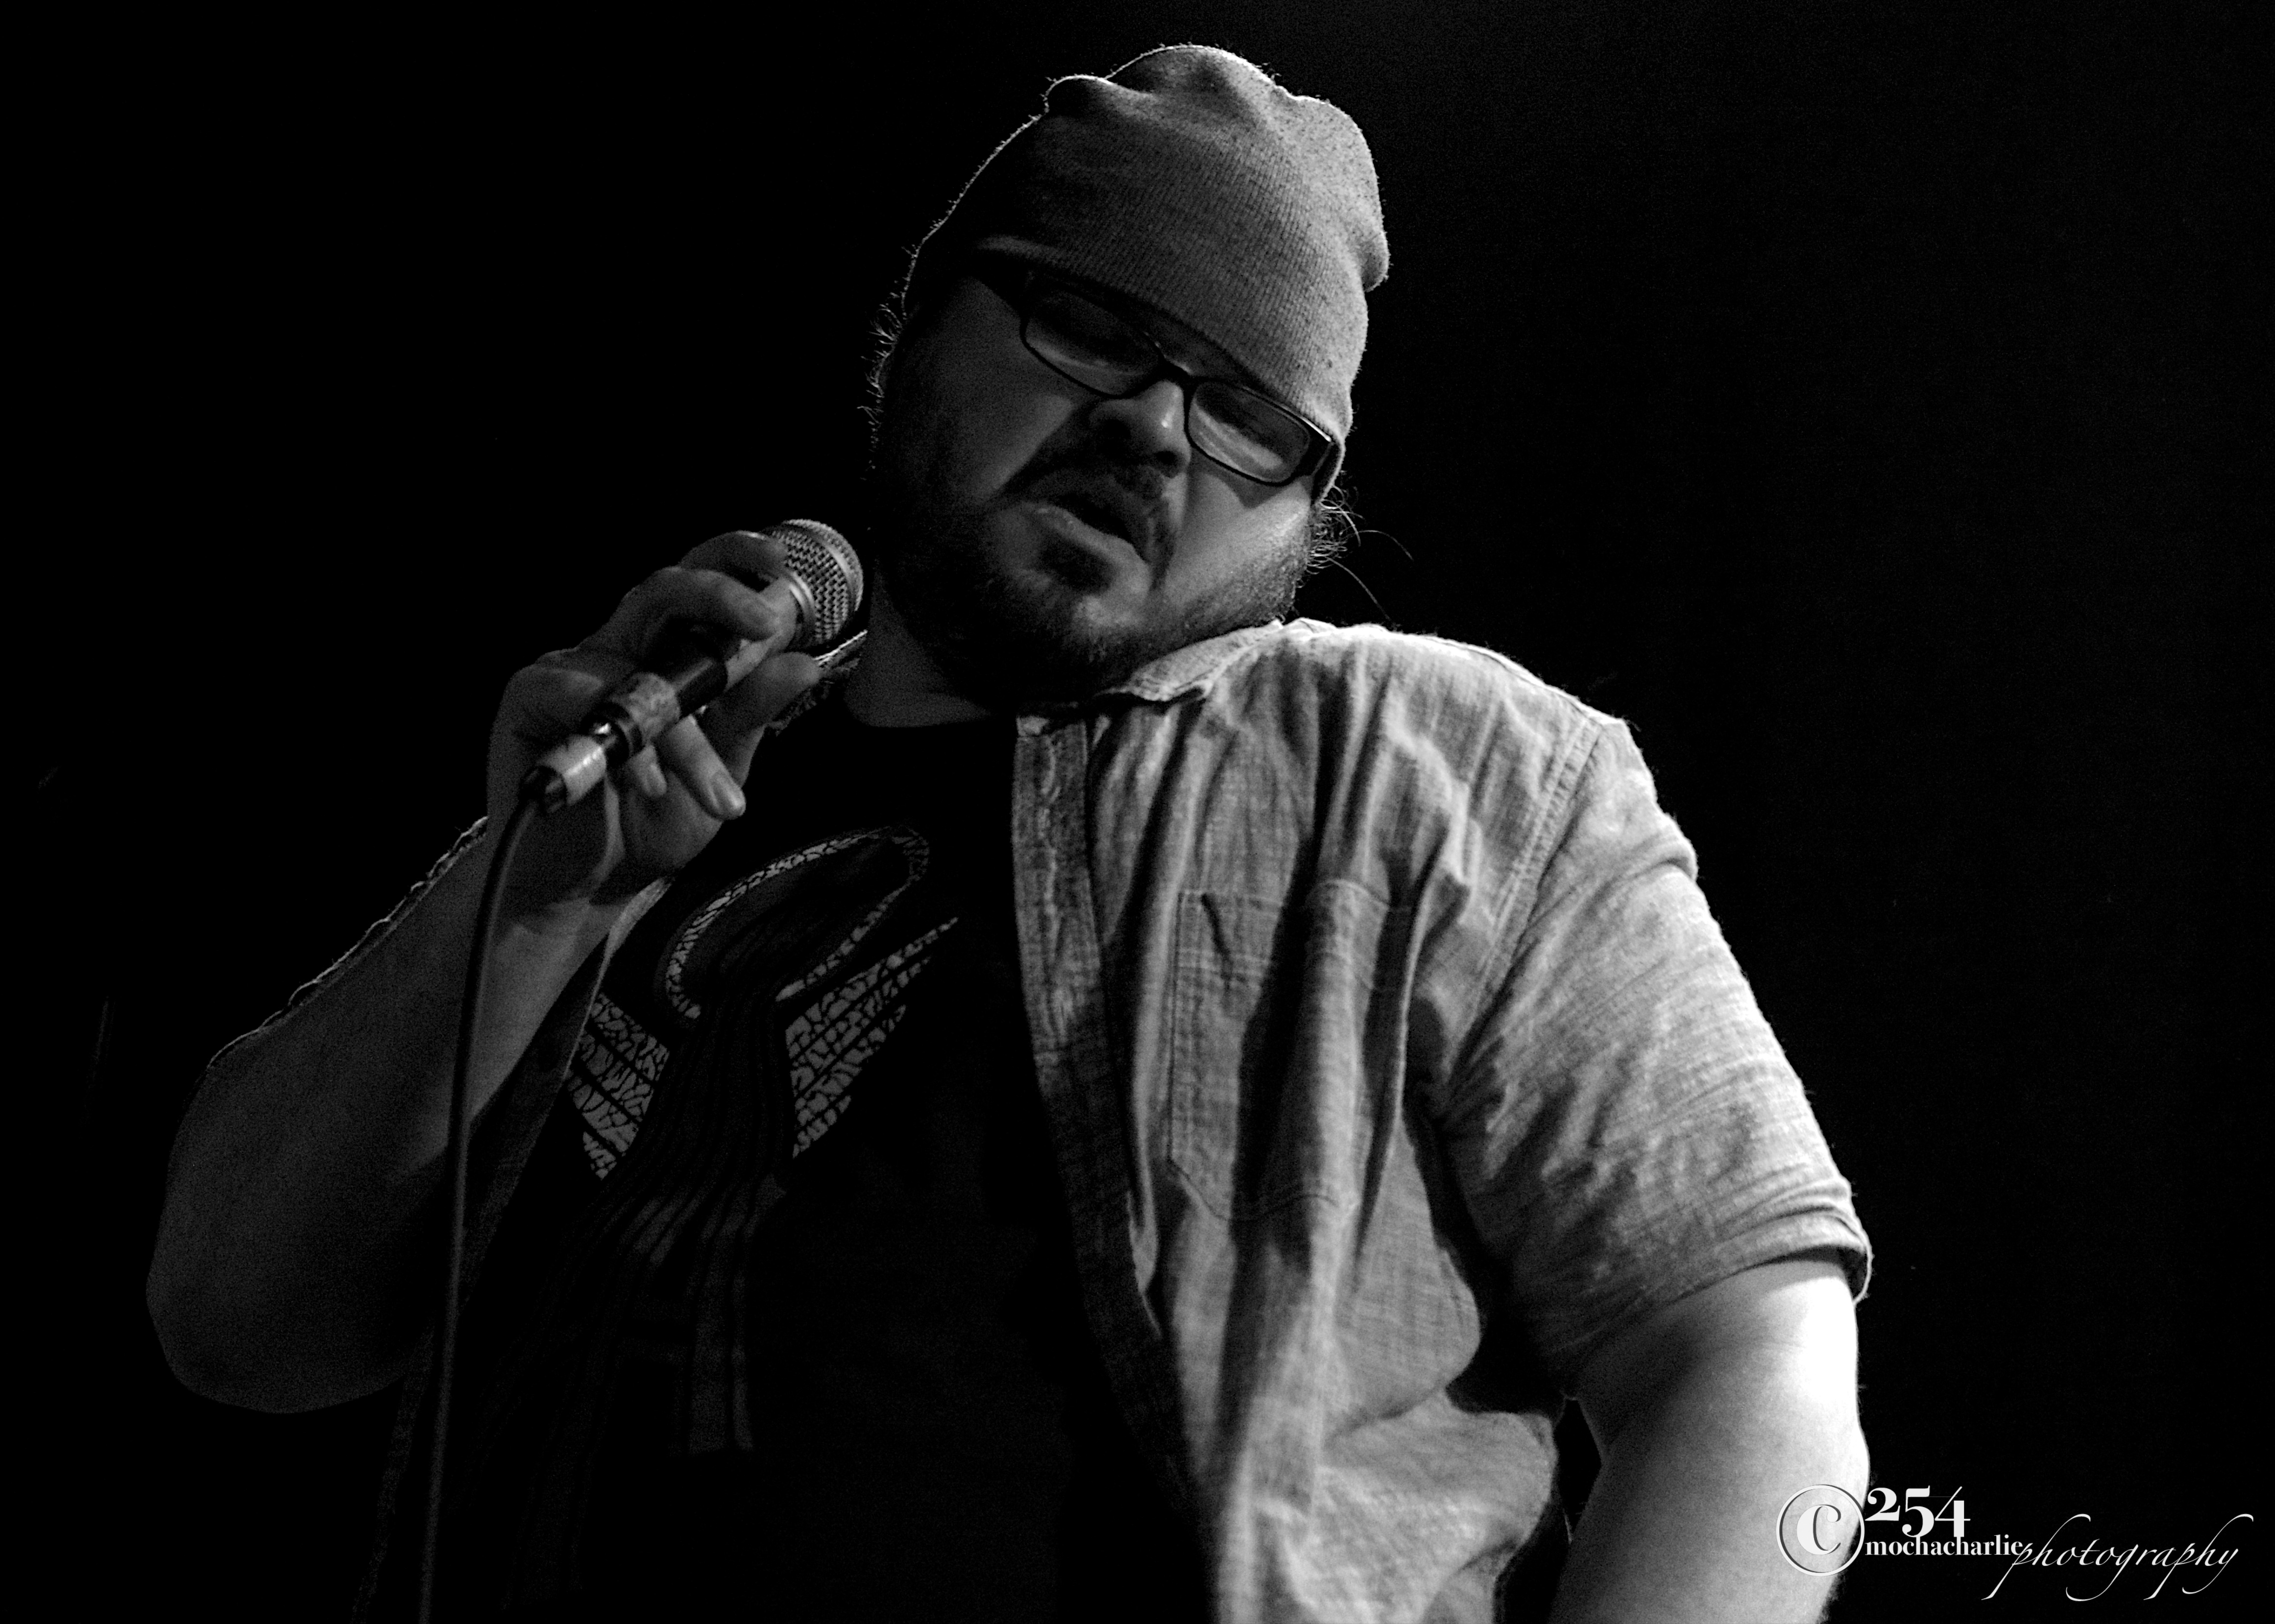 Dr. Fink performs with The Staxx Brothers @ Nectar Lounge (Photo by Mocha Charlie)